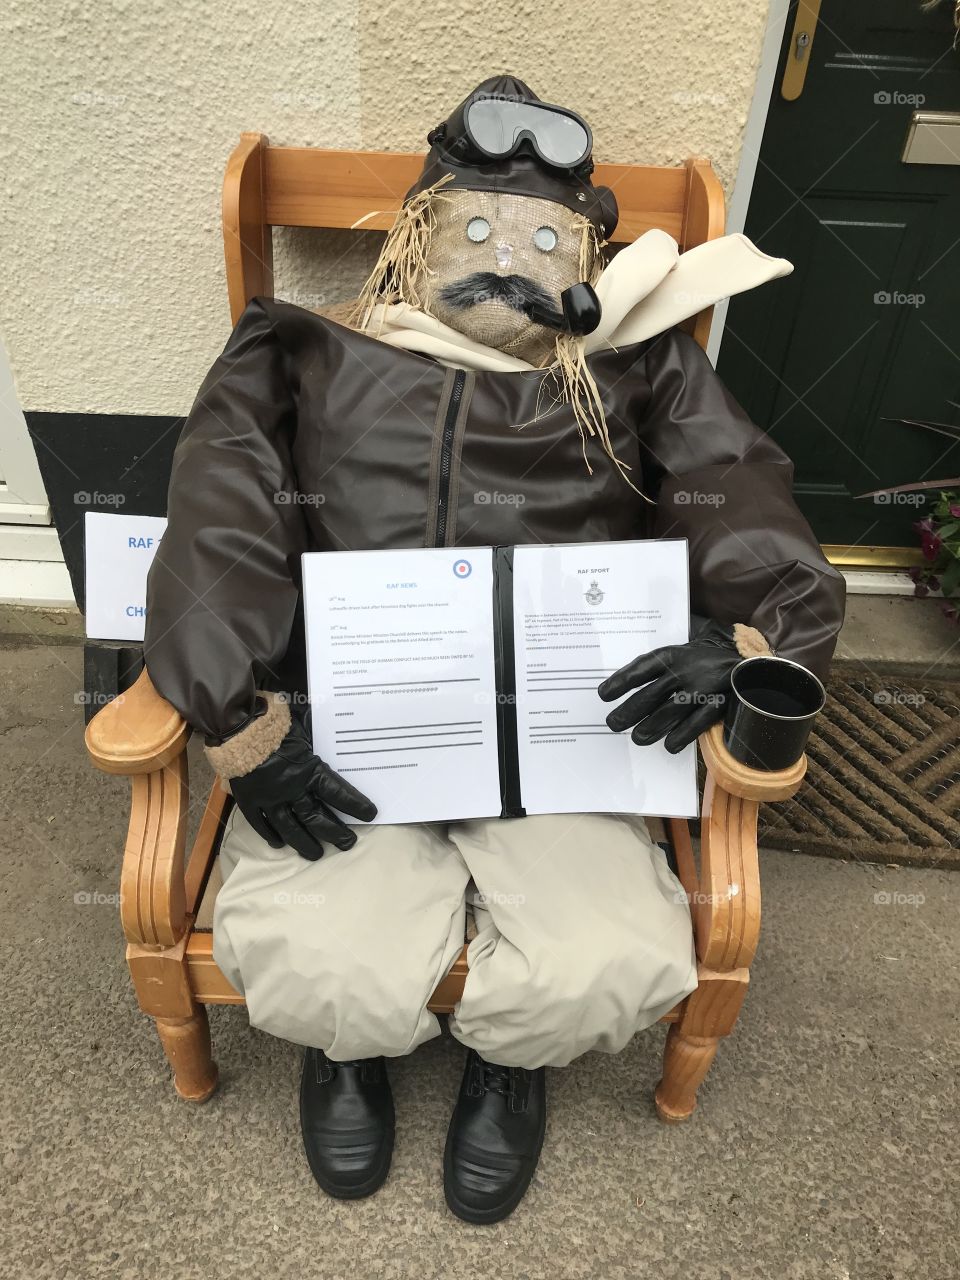 This scarecrow is perhaps best portrayed as the “lazy security guard” the one who sleeps on watch, too much straw and not much brain.